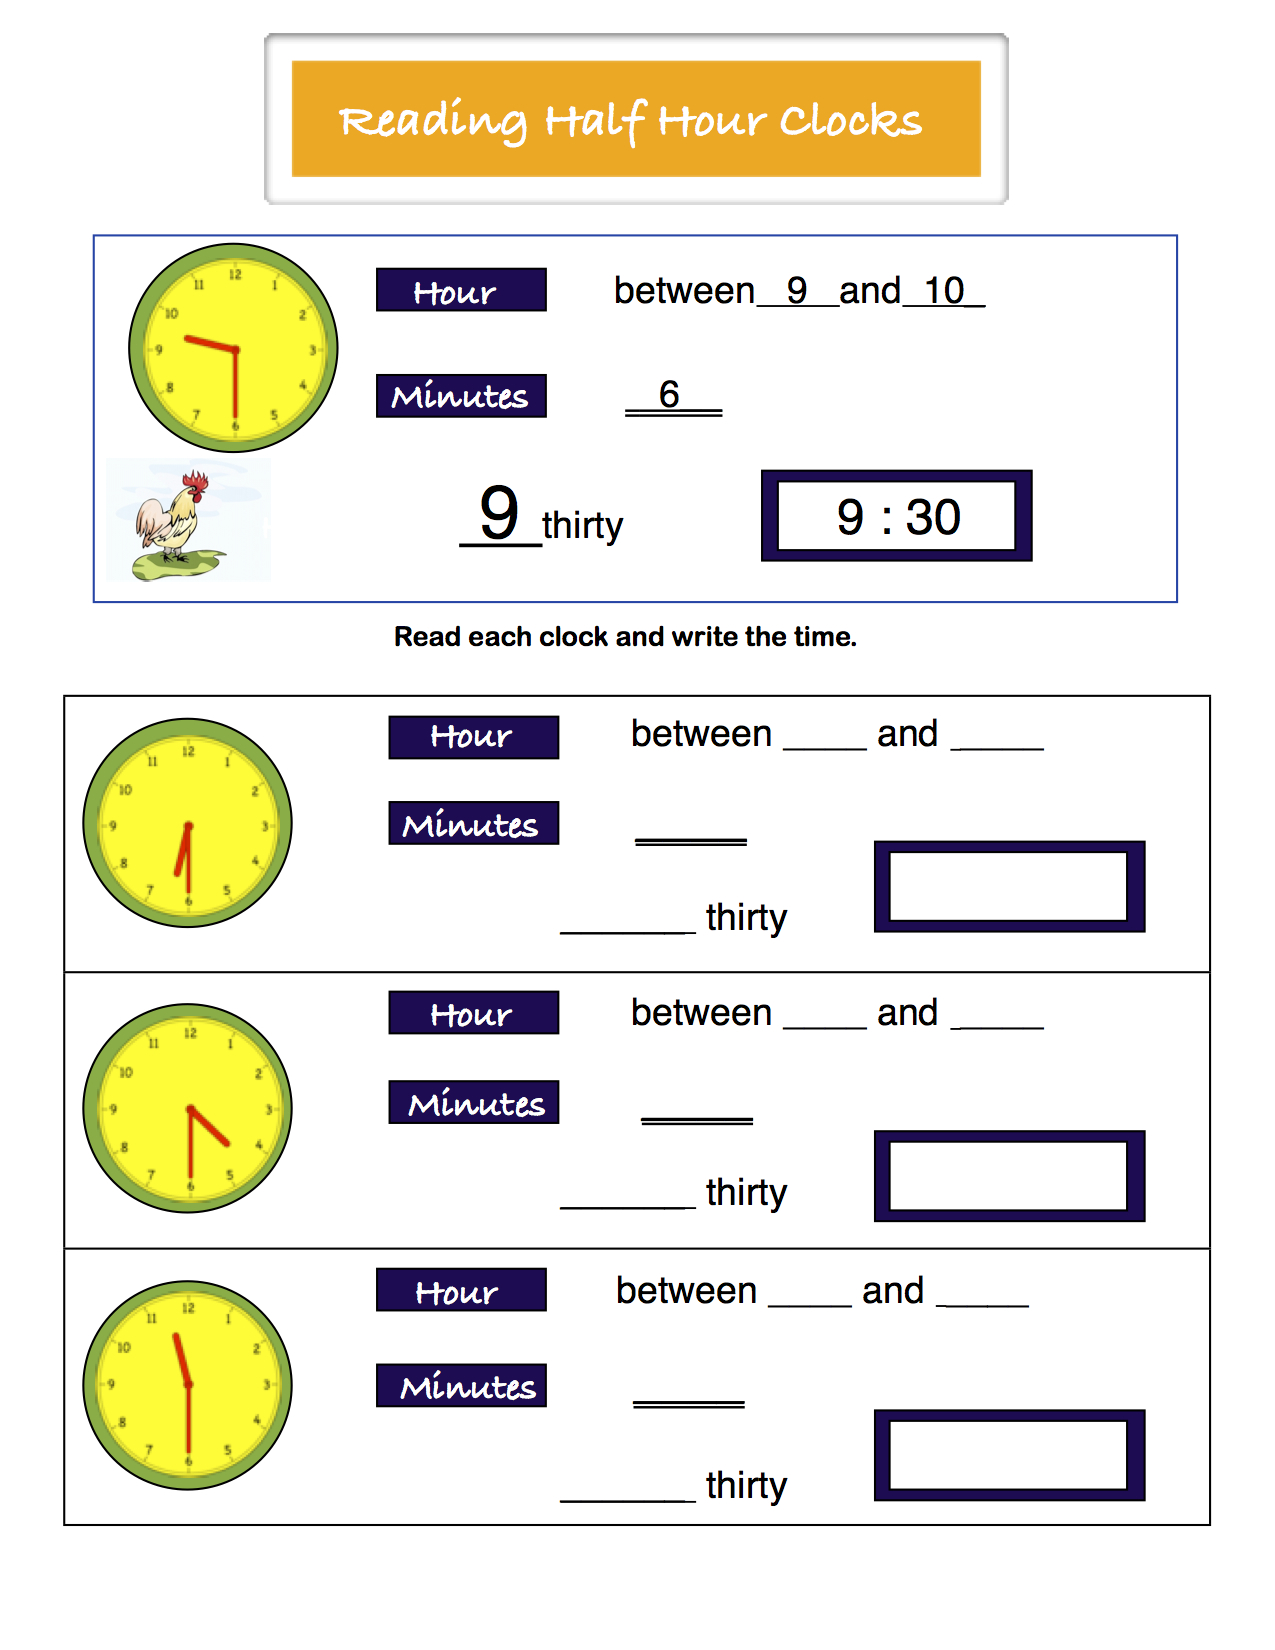 Preview image for worksheet with title Reading half hour clocks